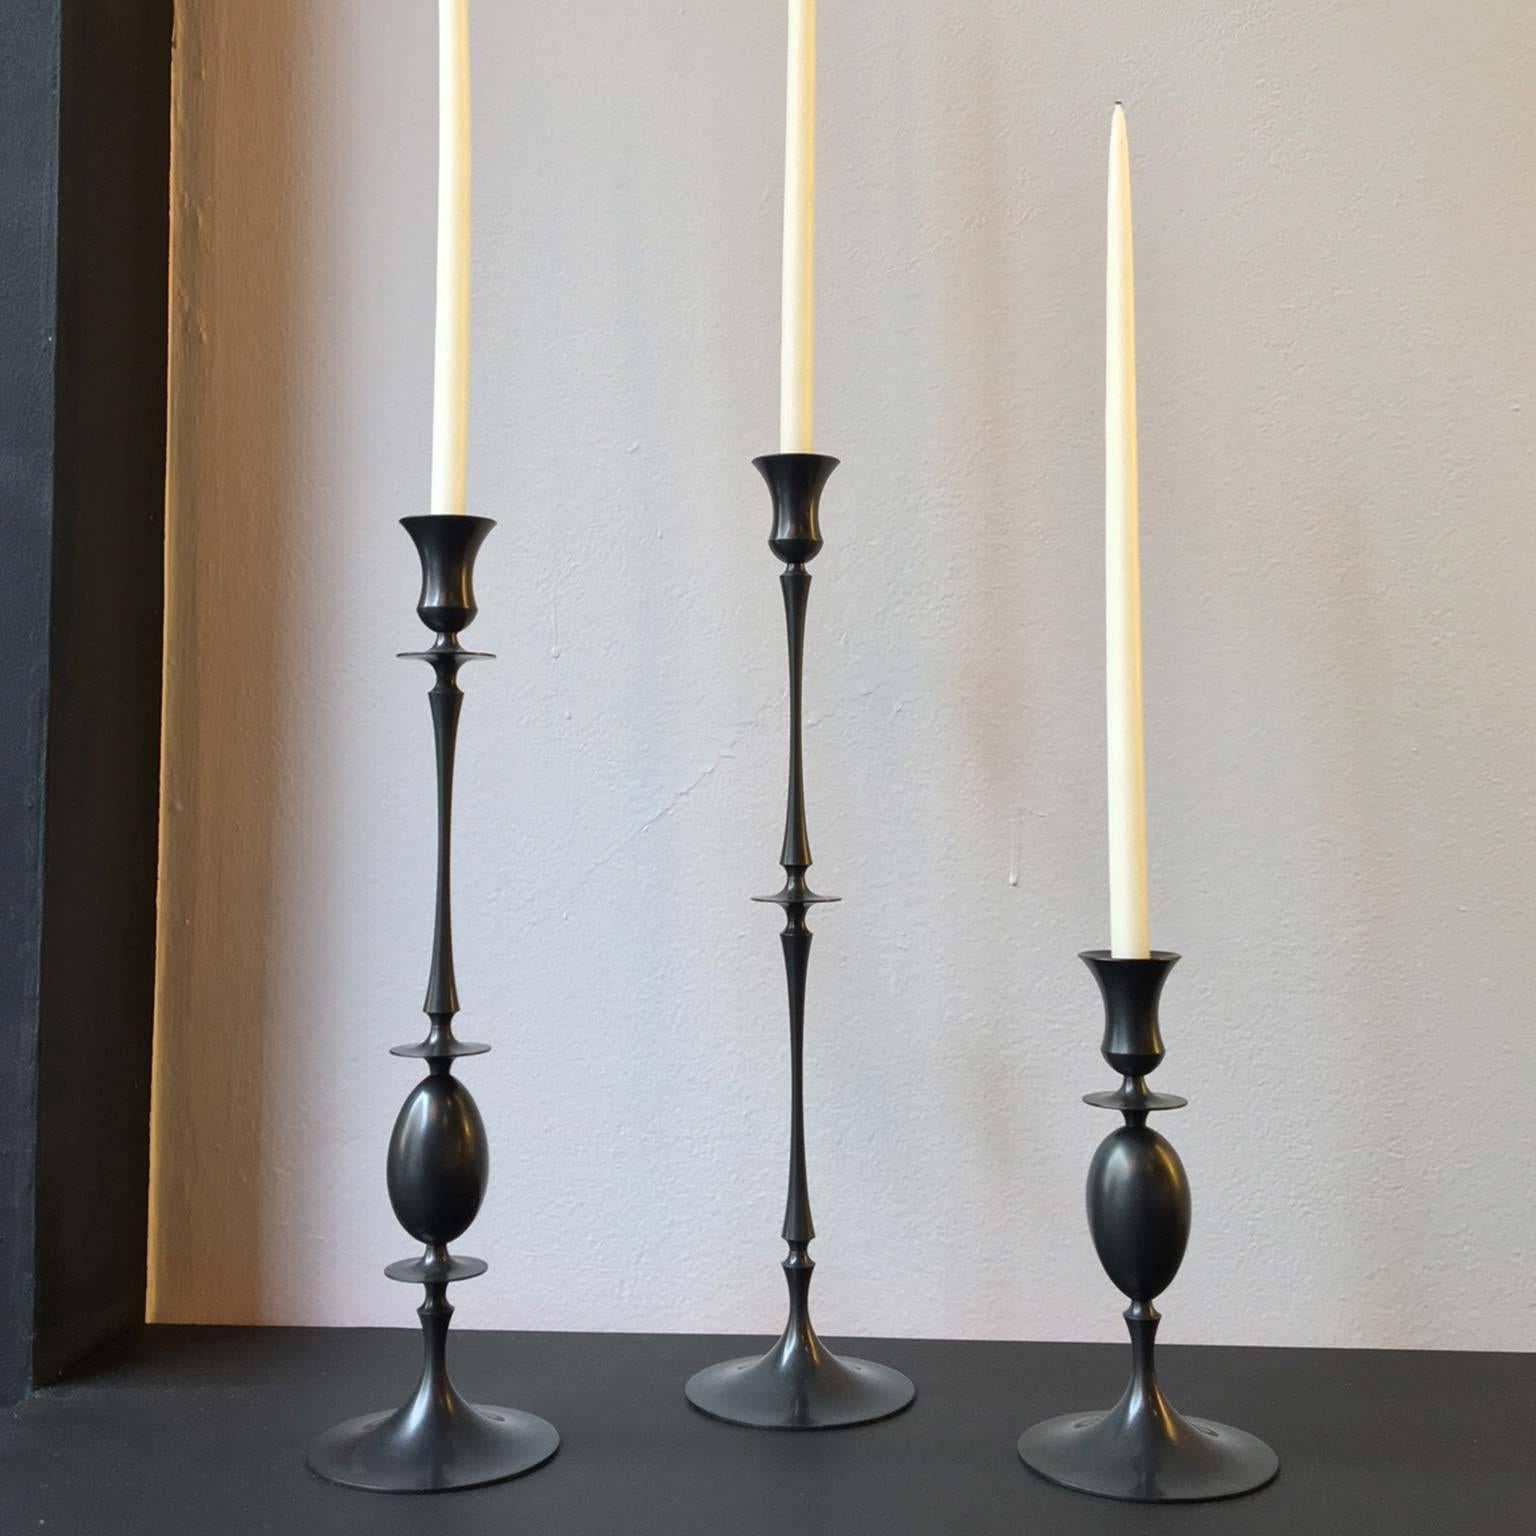 Inspired by the precision of nineteenth-century lathe work, Ted Muehling based these candlesticks on three basic shapes: the egg, an attenuated rod, and a trumpet form. By combining and varying these, Muehling has created 17 different candlesticks